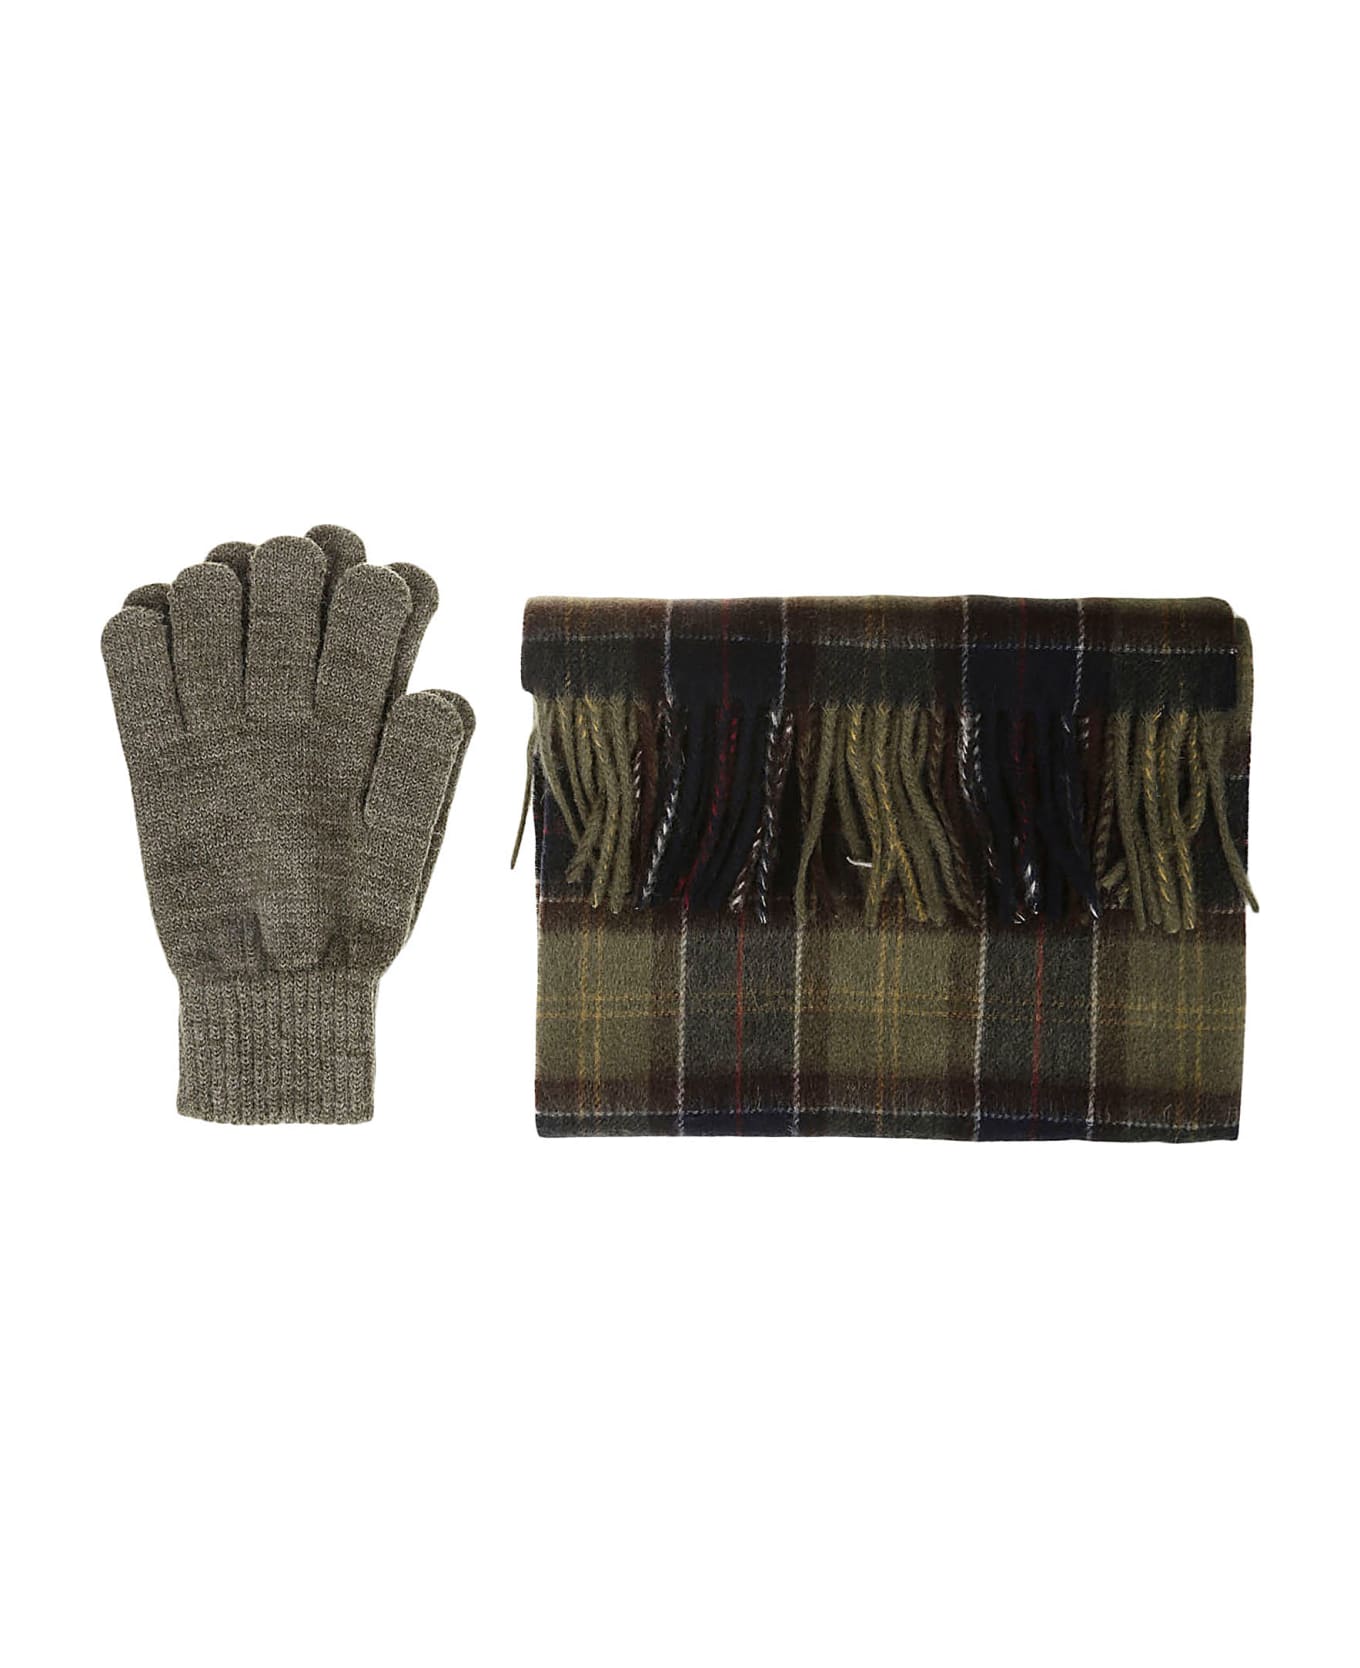 Barbour Tartan Scarf Glove Gift Set - Classic Olive